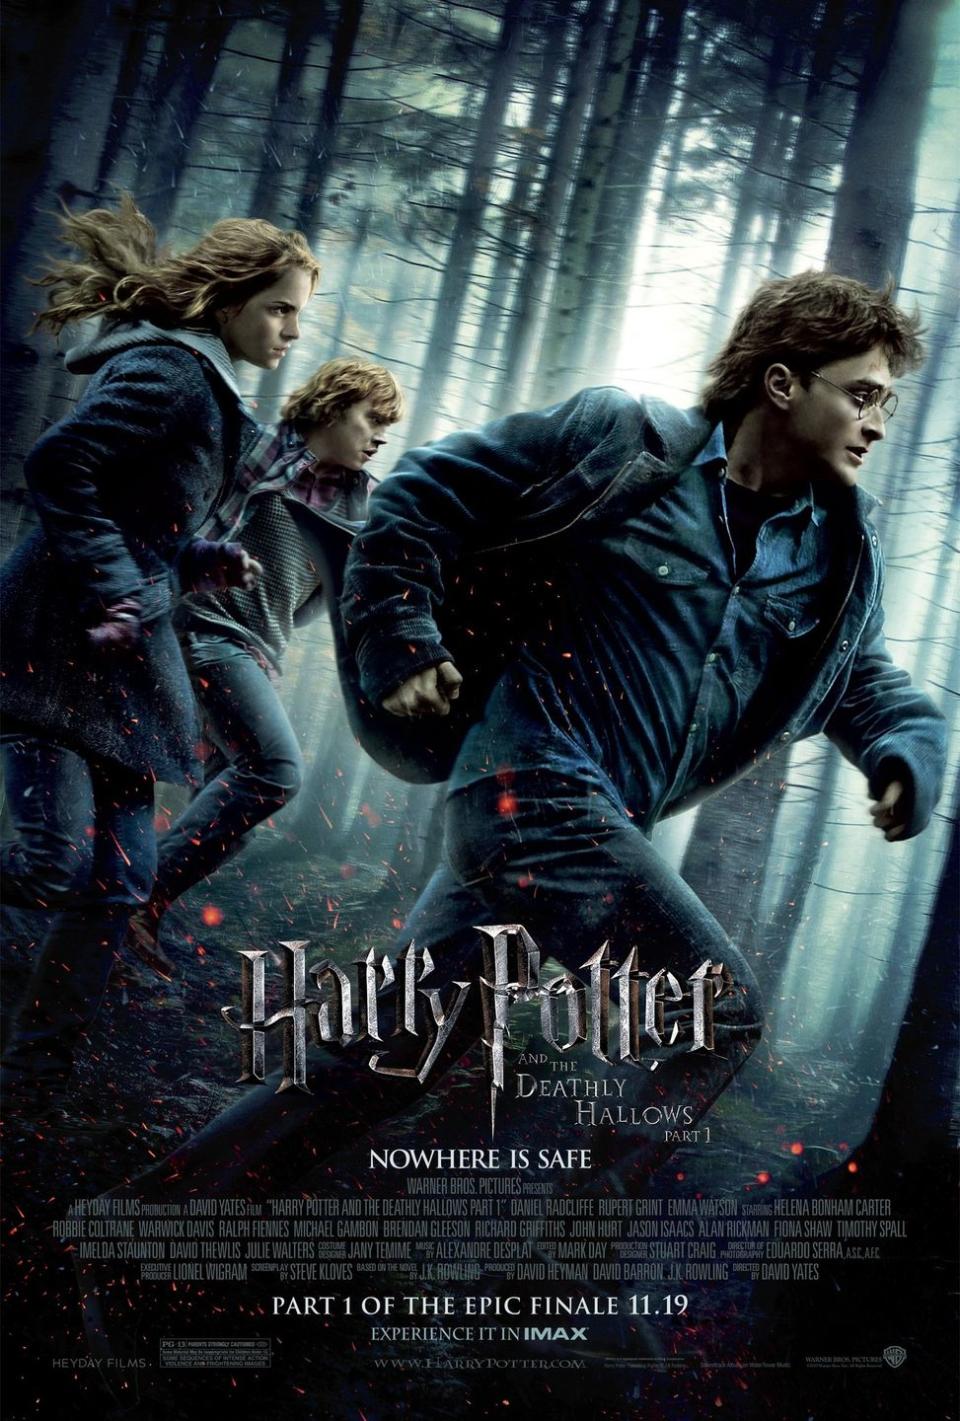 9) Harry Potter and the Deathly Hallows Part 1